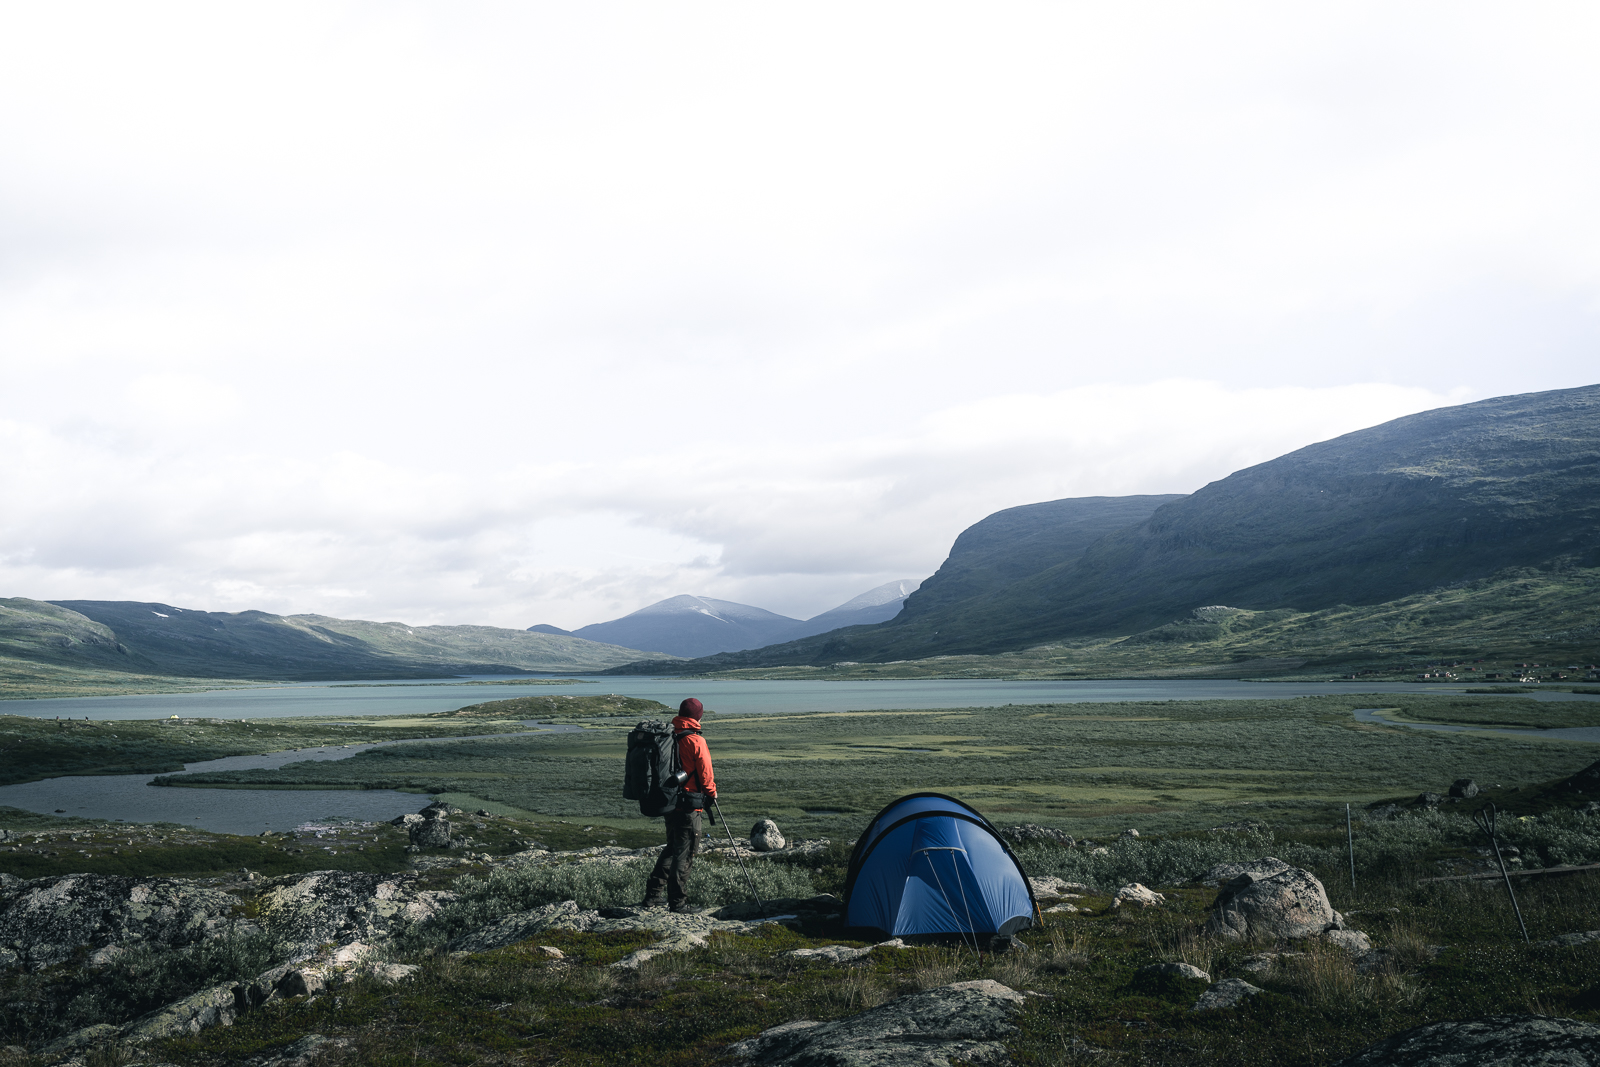 Camping in the Swedish wilderness